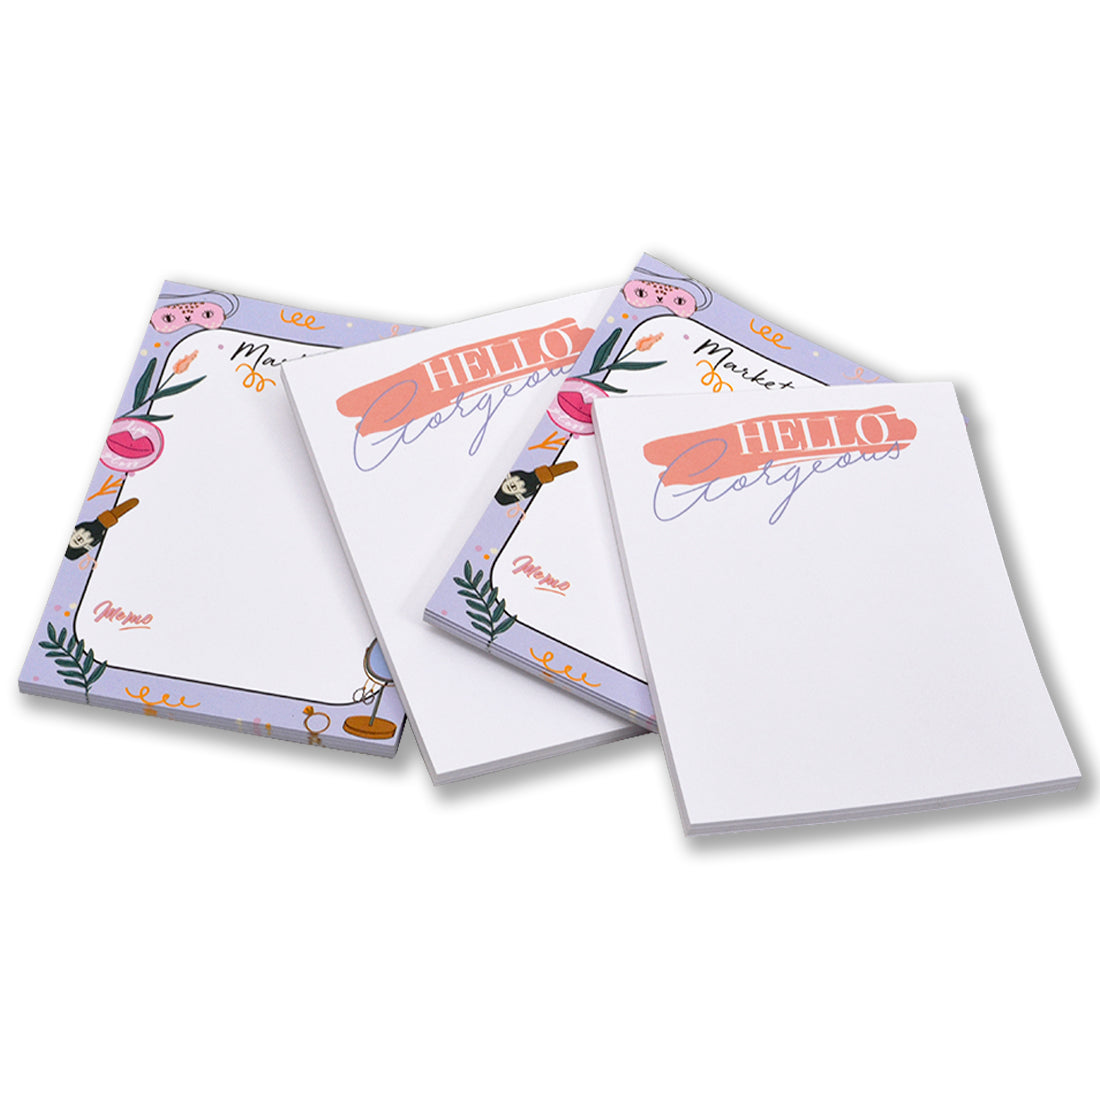 To Do List Notepad, Notes, to-Do’s, to-Buy, Priorities Memo Pad for Shopping Lists, Reminders and appointments Set of 4 Writing Pads